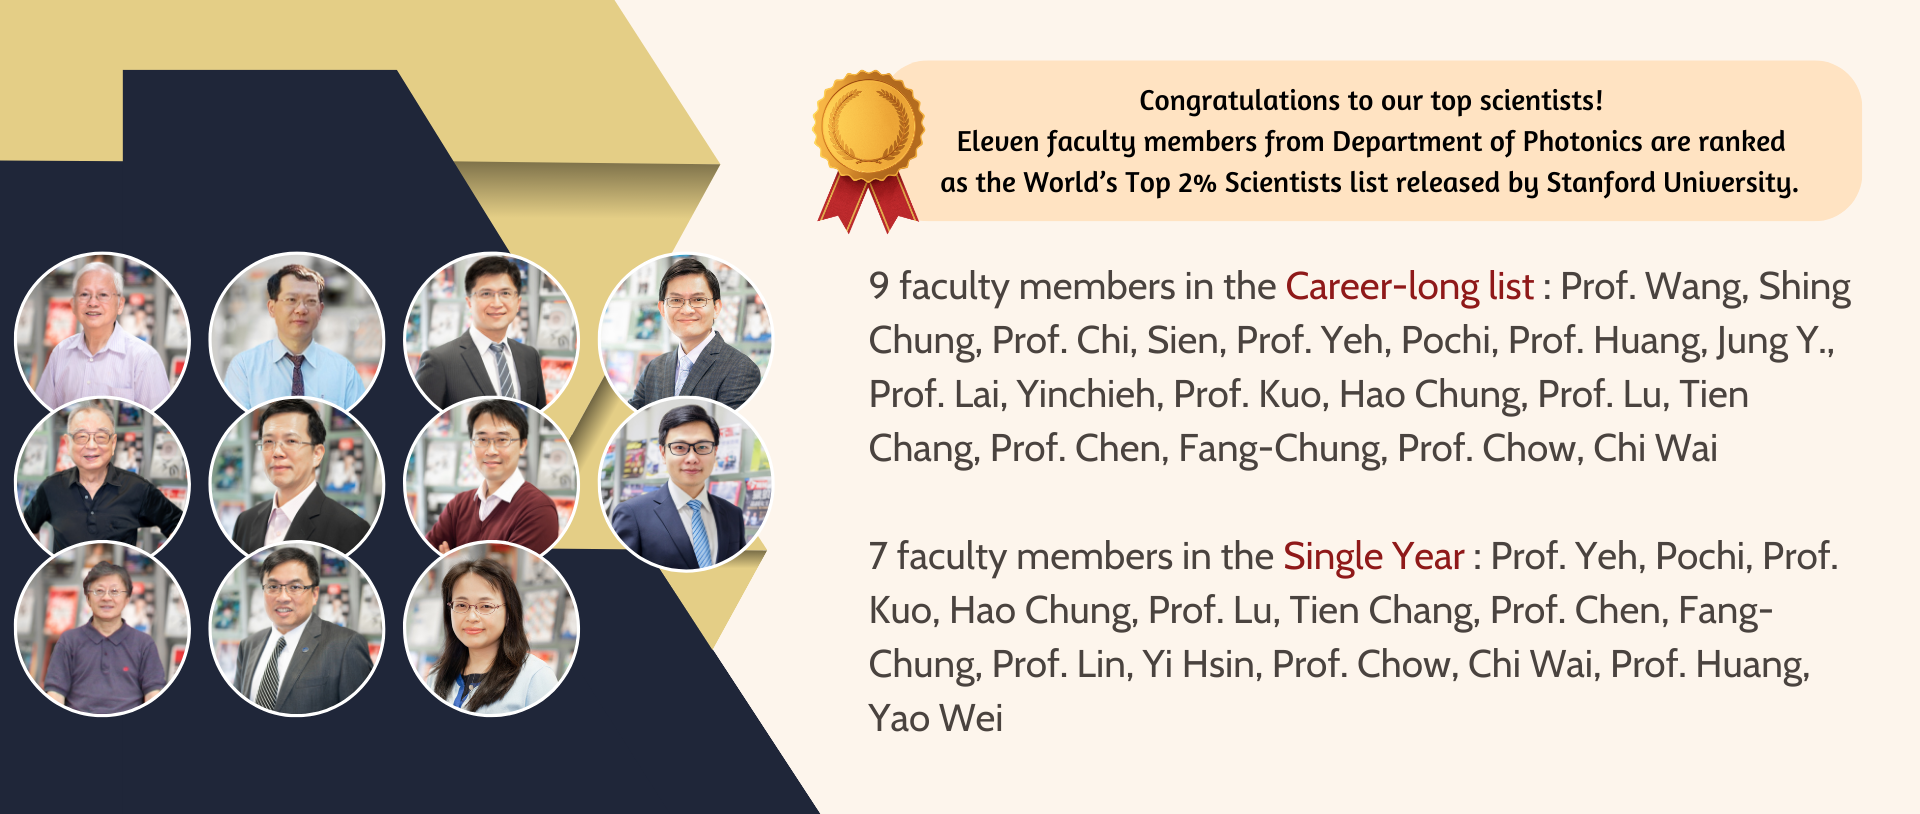 Congratulations to our top scientists!  Eleven faculty members from Department of Photonics are rank